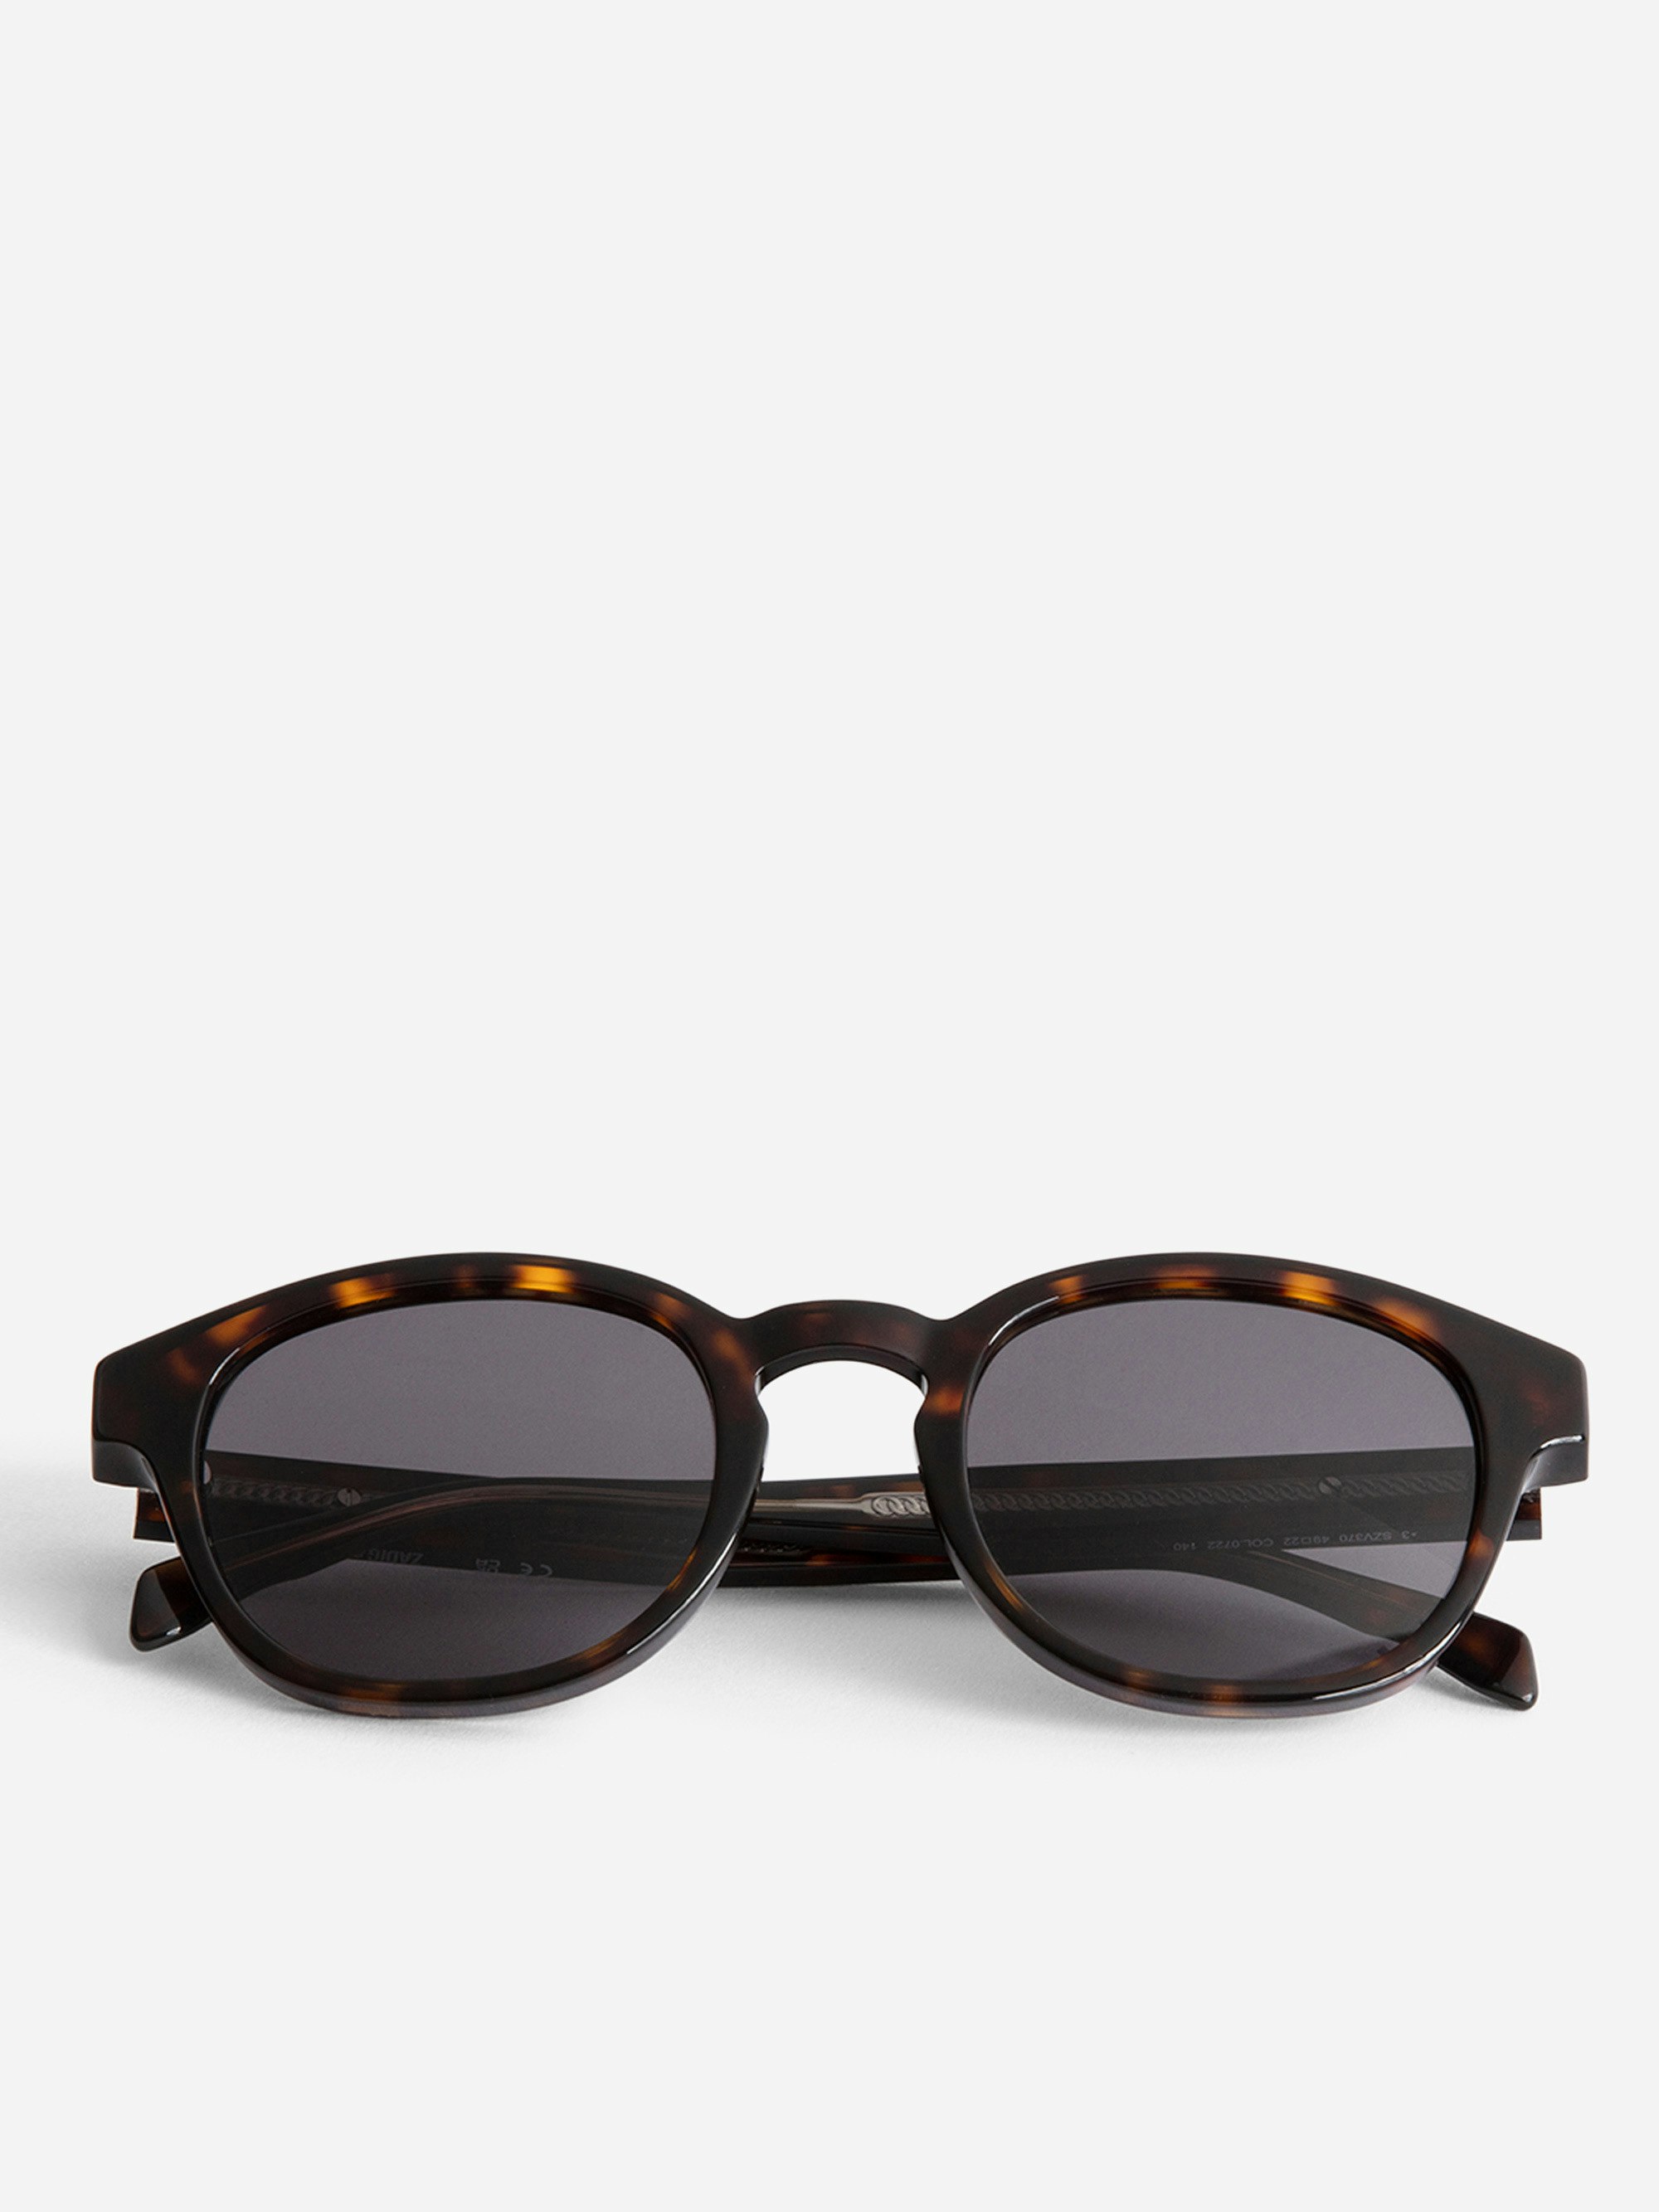 ZV23H6 Sunglasses - Unisex brown rounded sunglasses with wings on the temples.